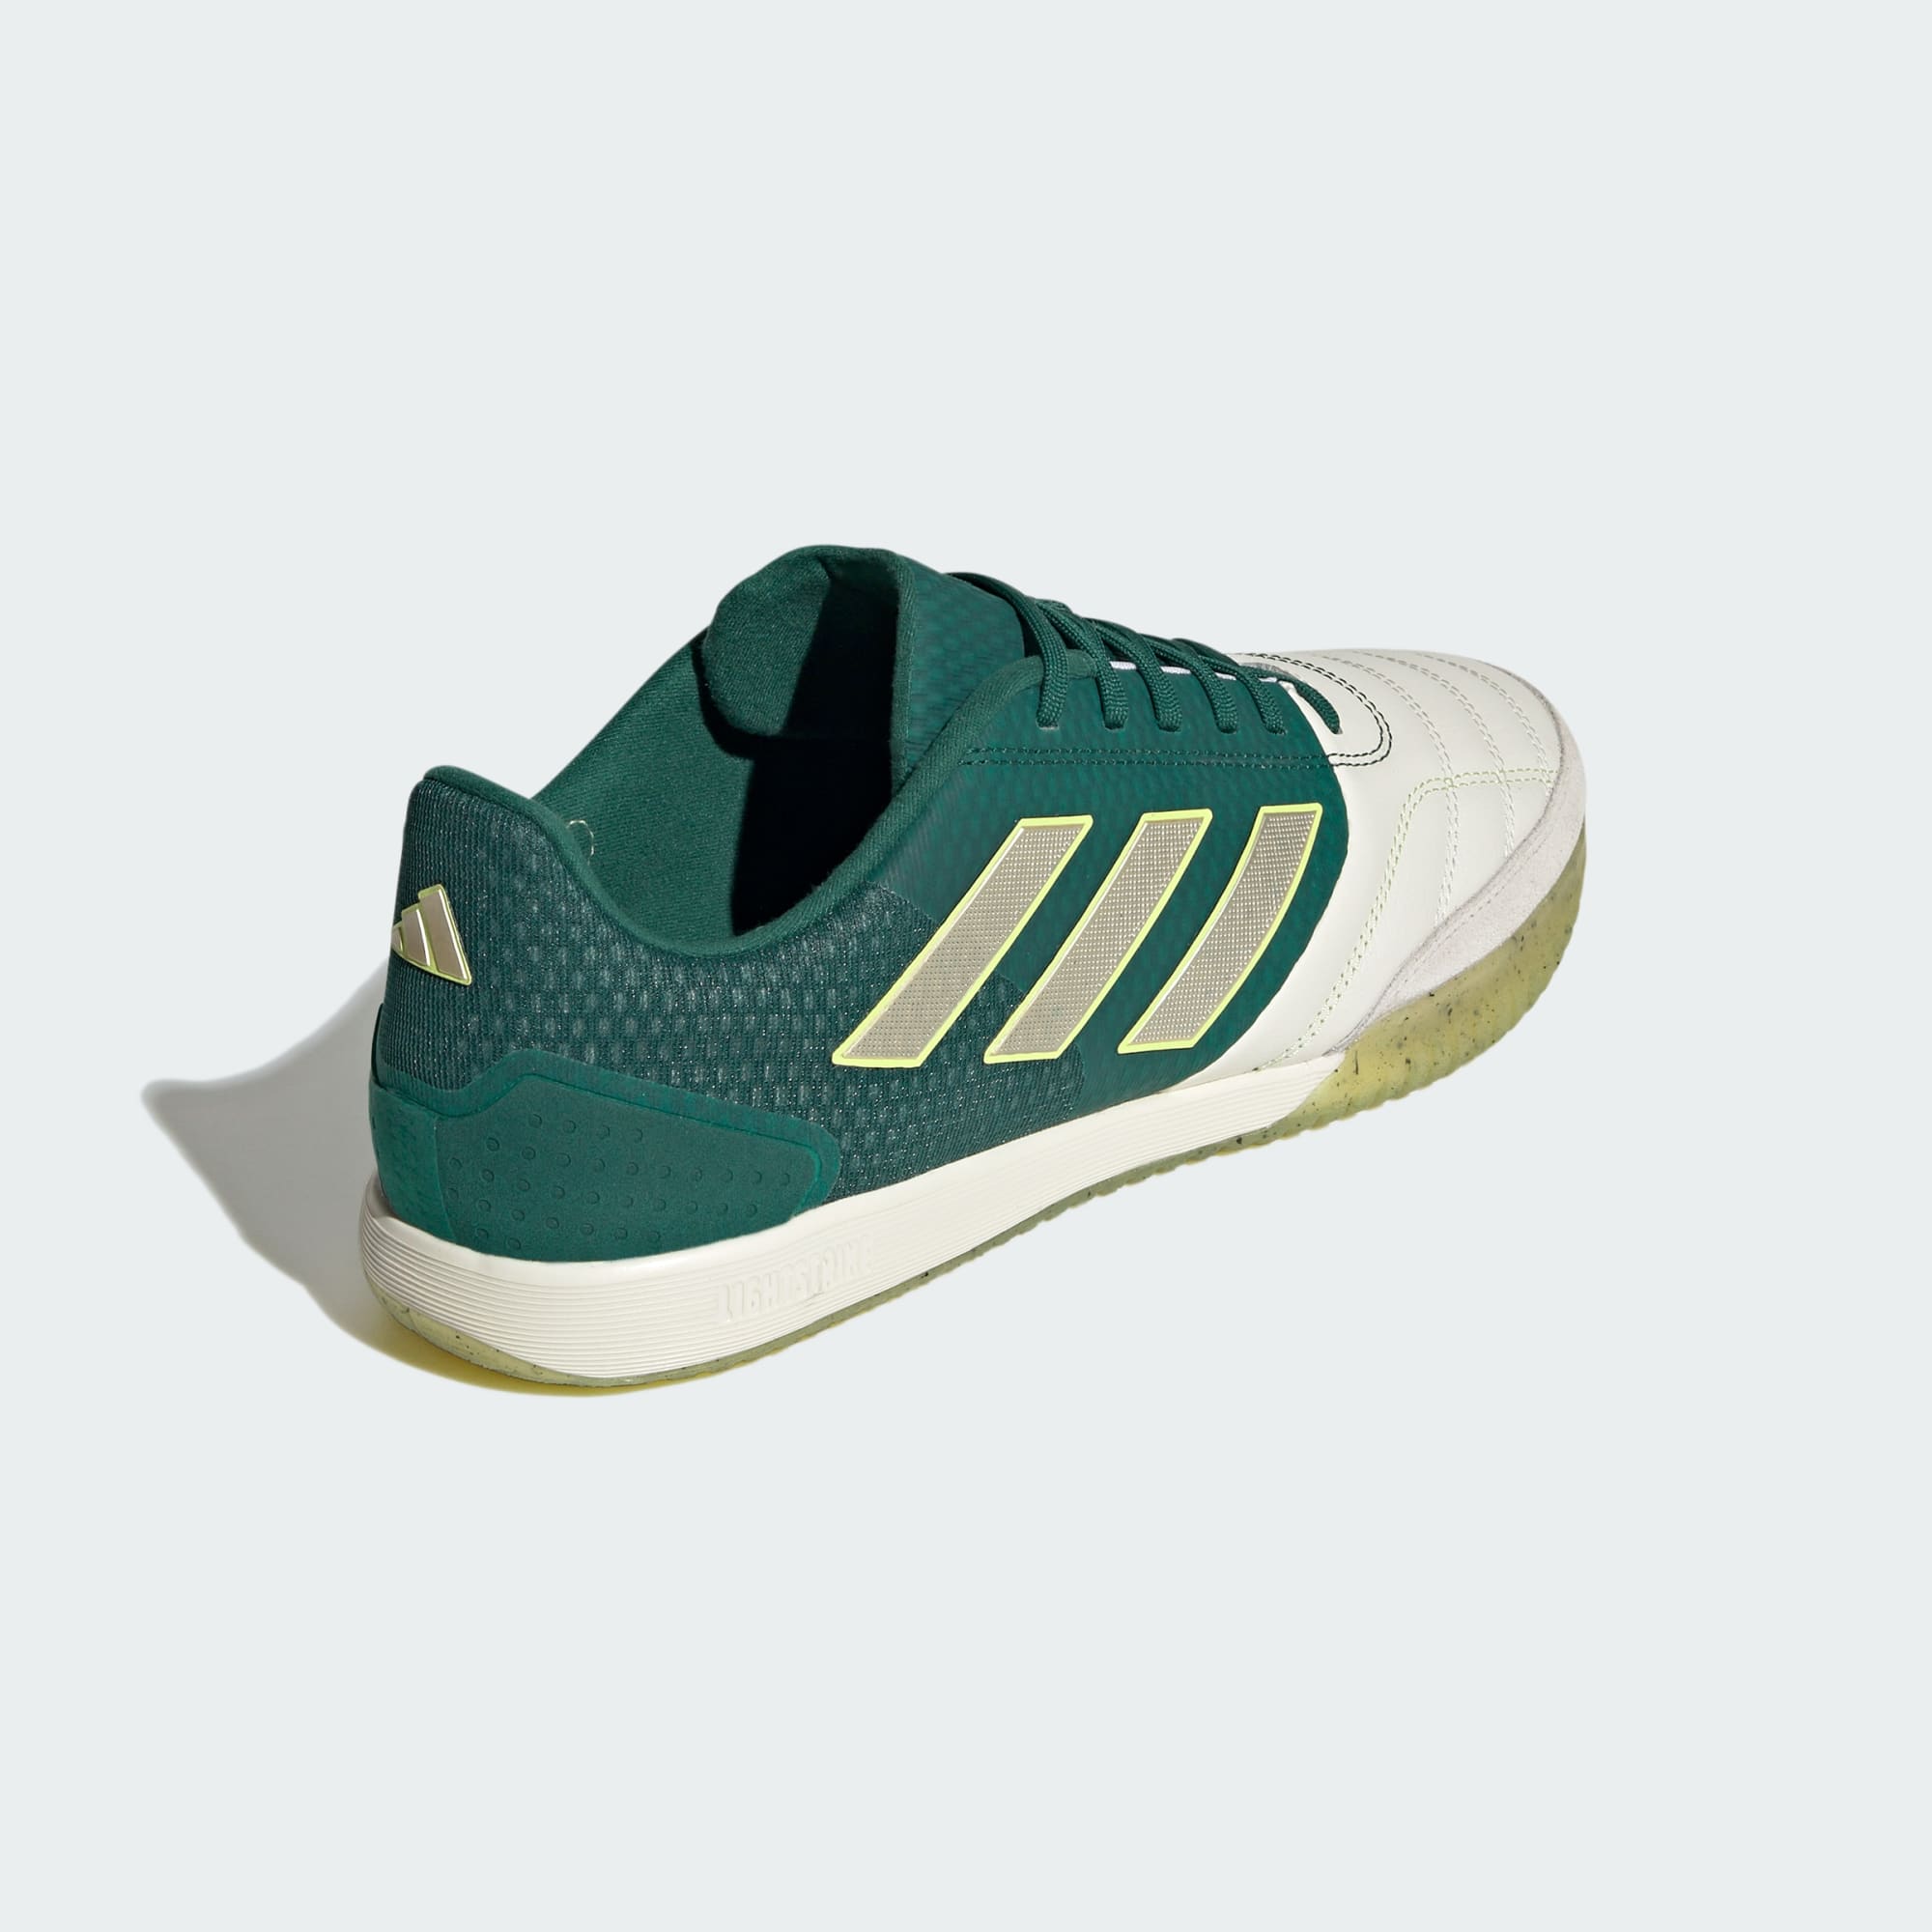 Sala Top / Competition Green Youth White Shoes - stefanssoccer.com:adidas Indoor